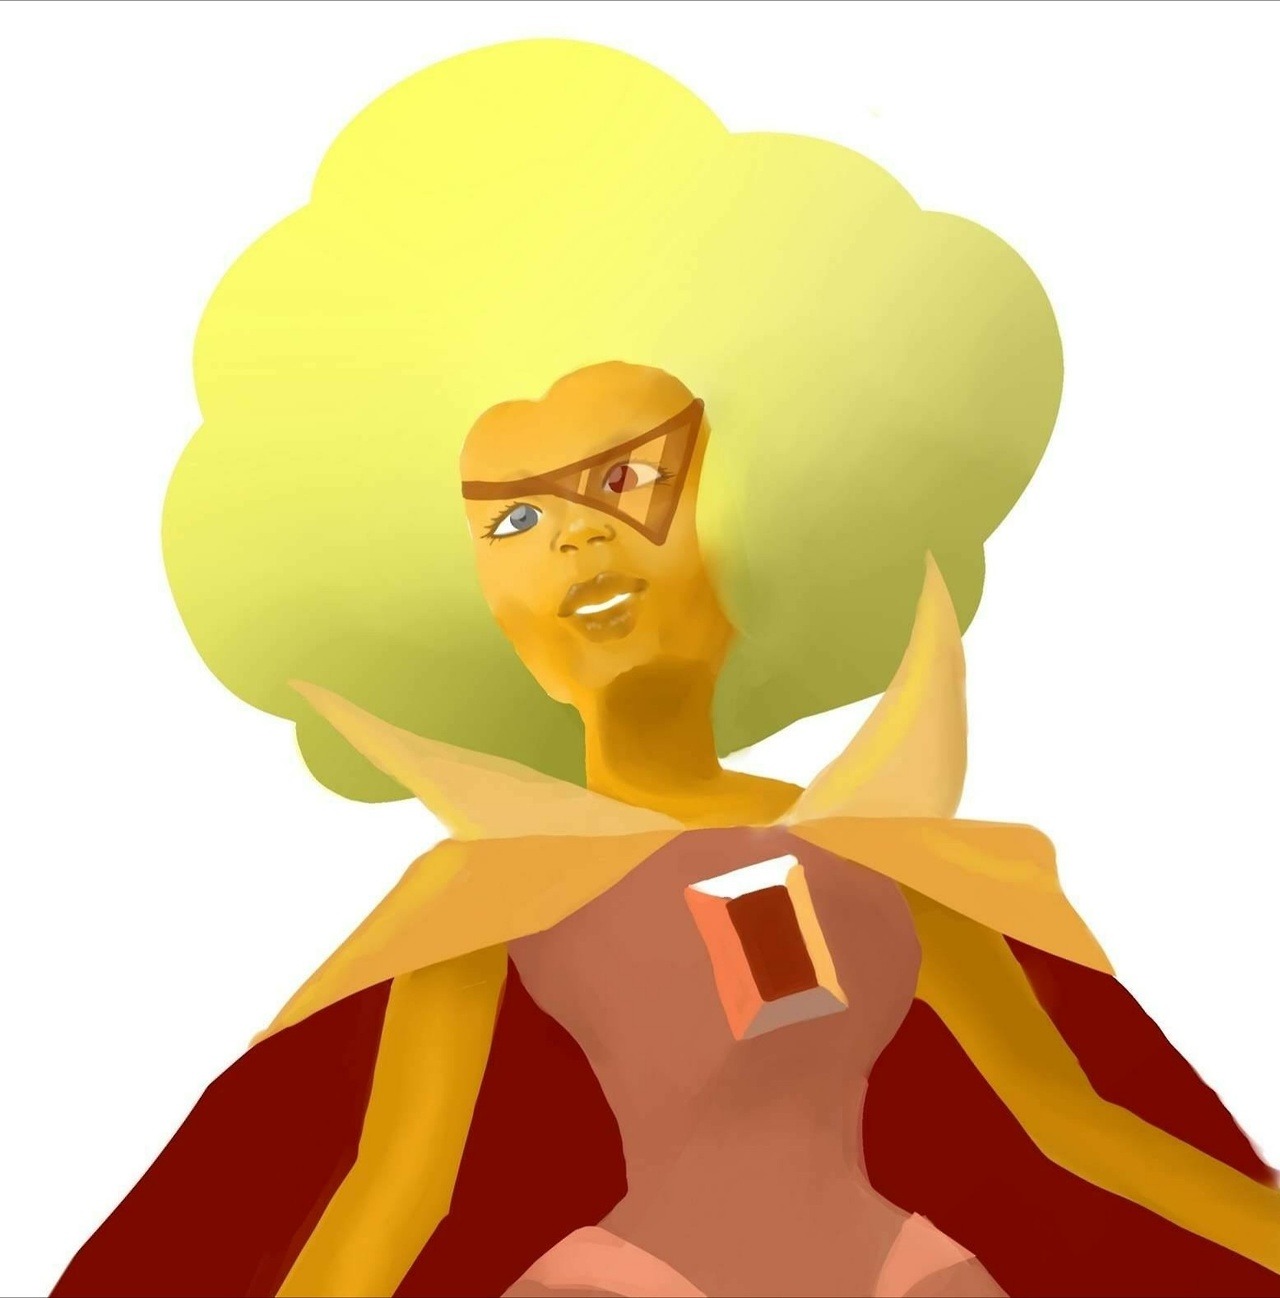 Hessonite! This is my first time experimenting with a more realistic style